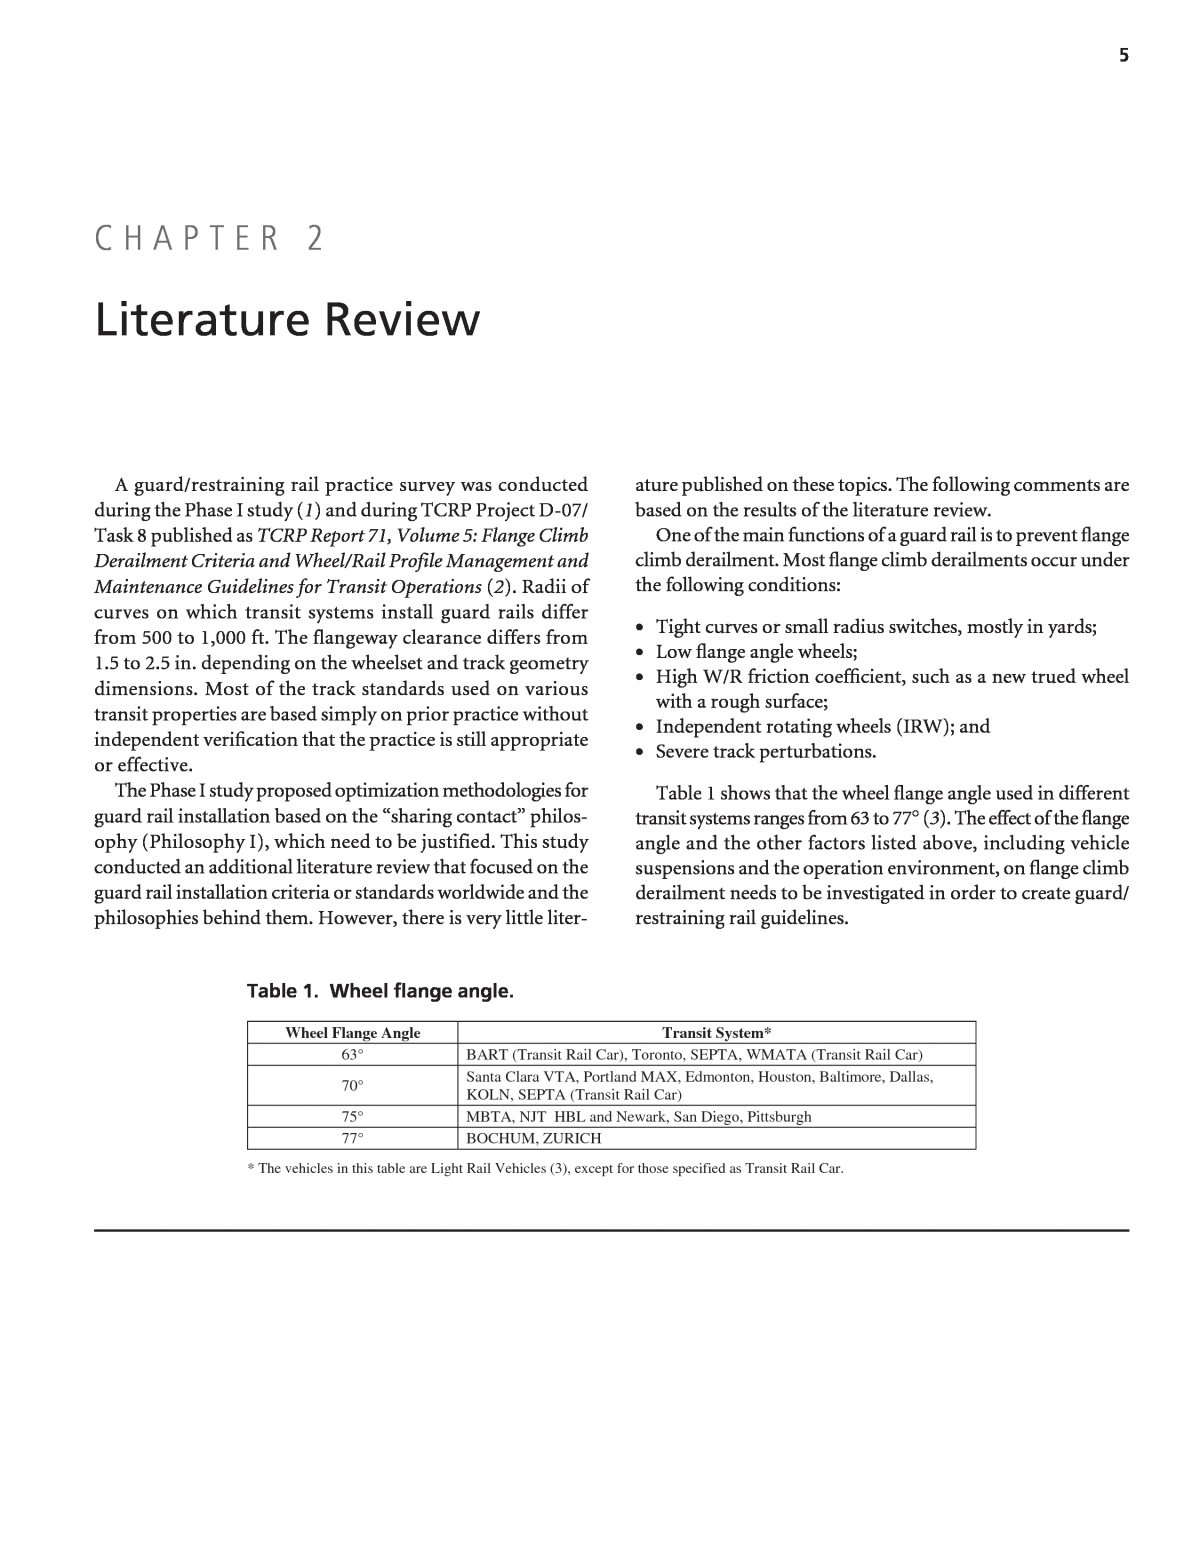 Review of related literature for online ordering system